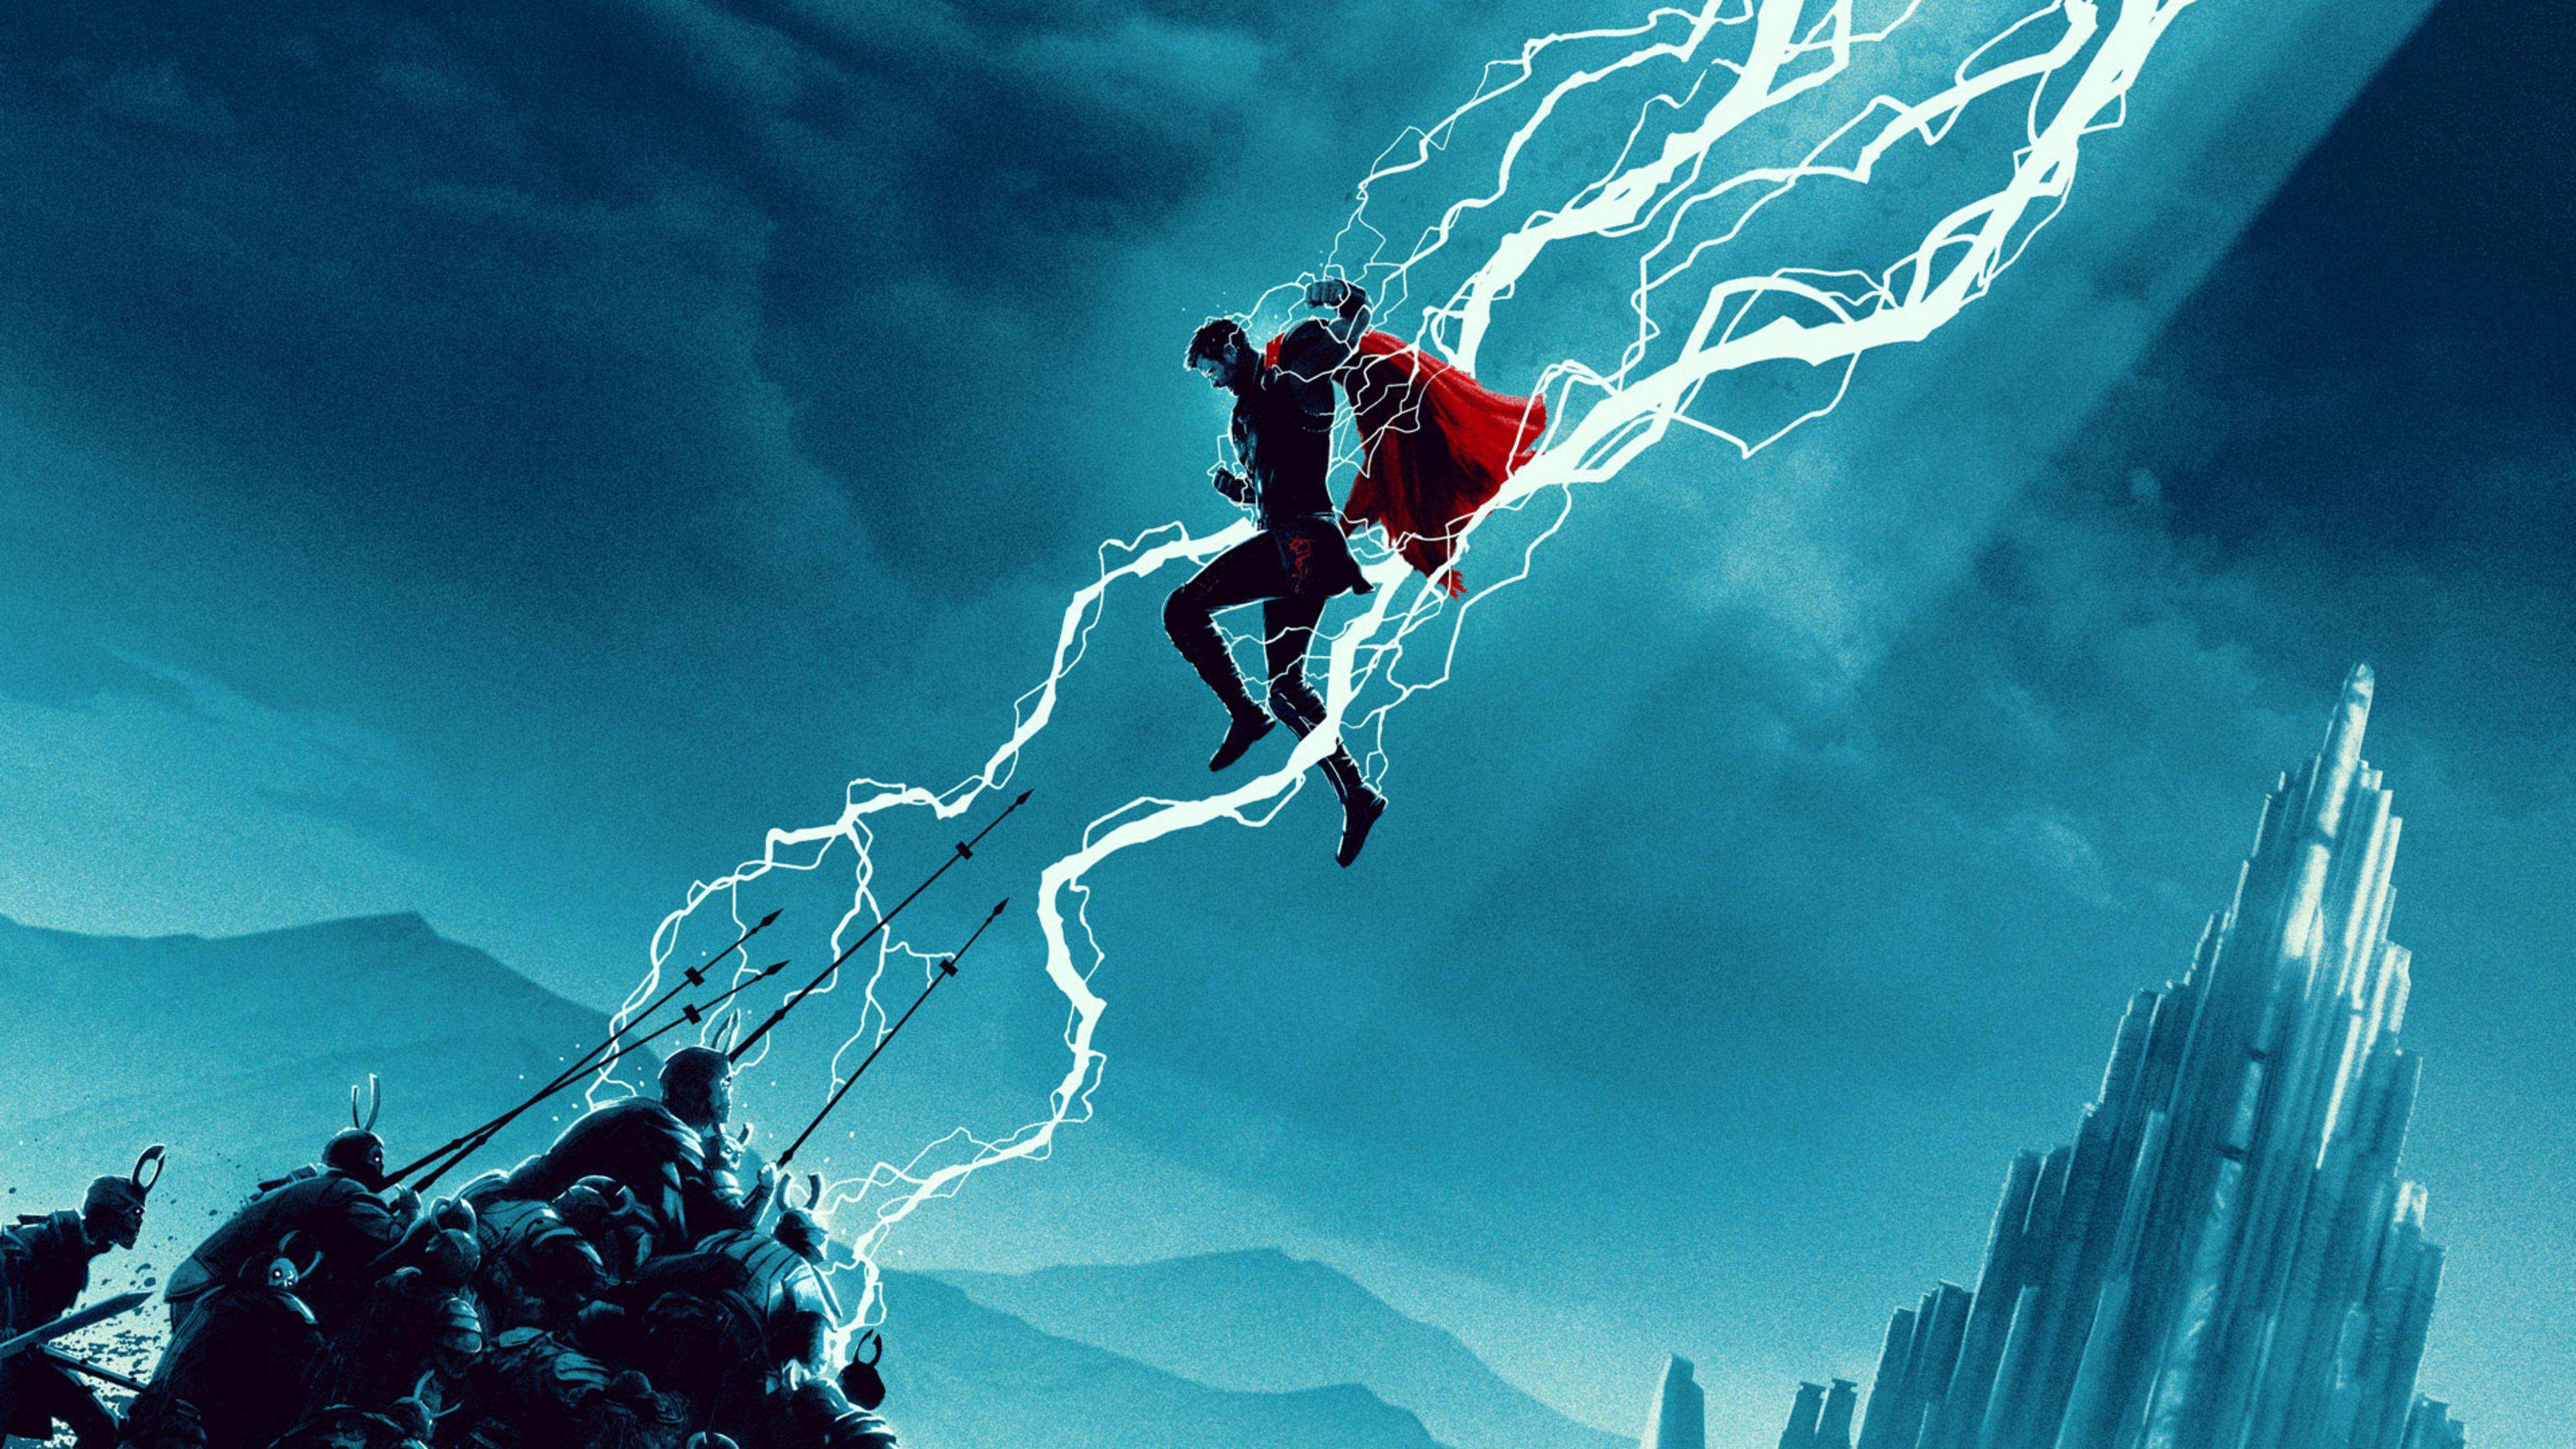 Thor, the mighty Avenger, is flying with lightning in his hands - Thor